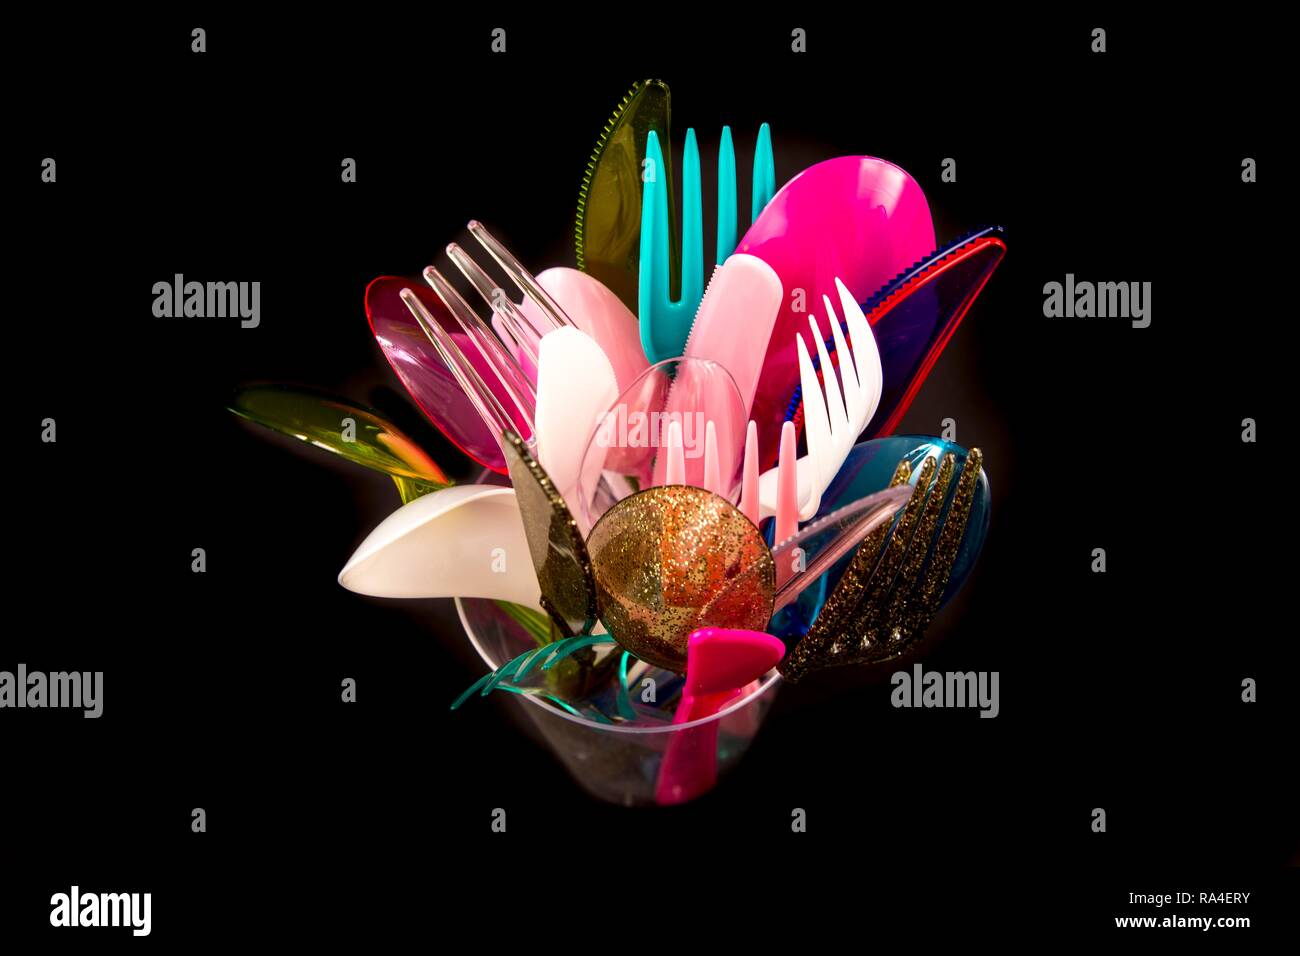 Plastic cutlery, disposable cutlery, knives, forks, spoons, plastic waste, various colours, types Stock Photo